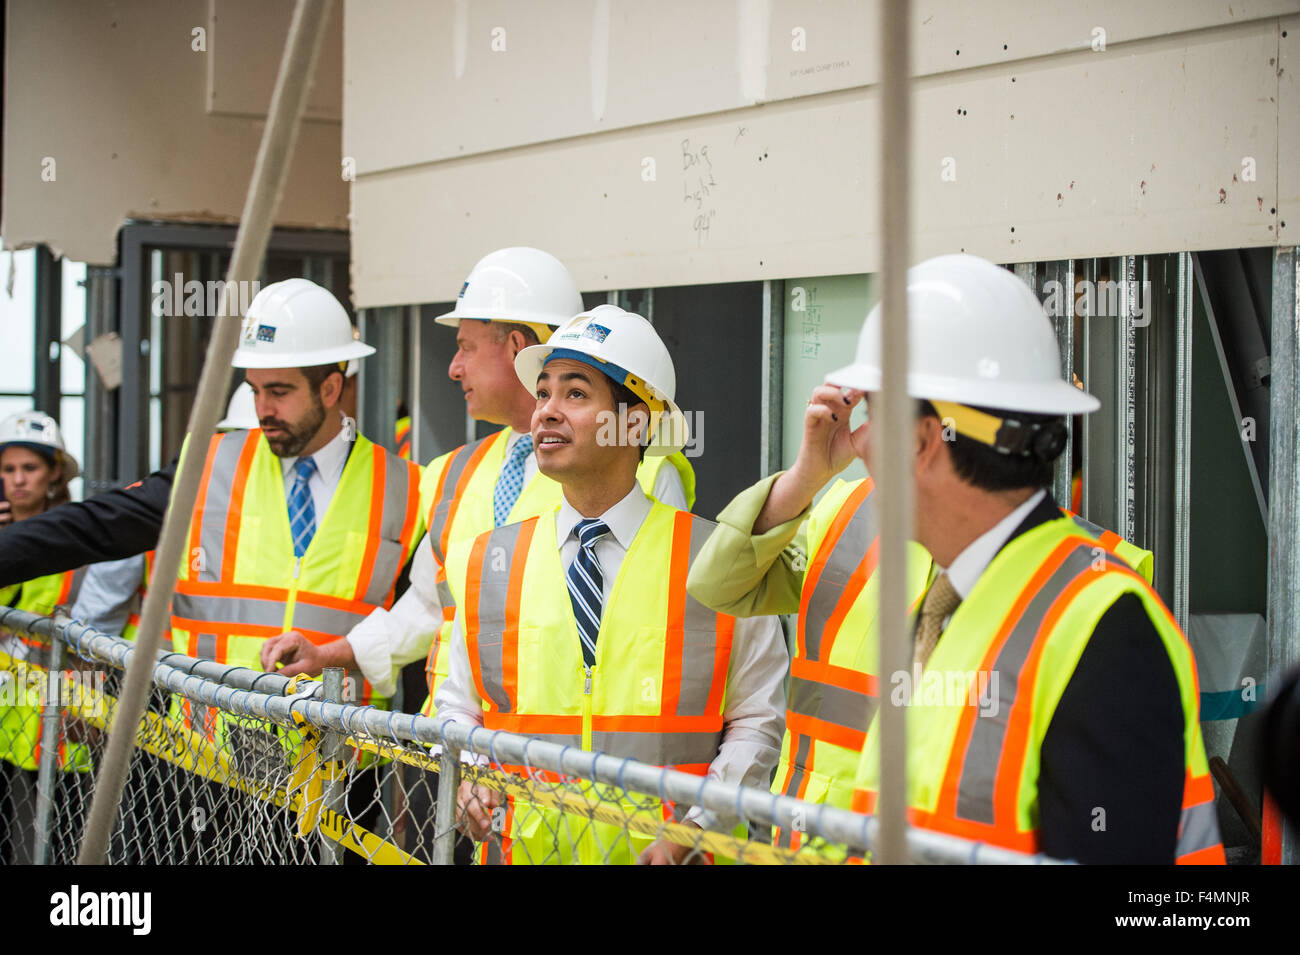 San Diego, California, USA. 19th Oct, 2015. U.S. Secretary of Housing and Urban Development Julian Castro visits the former Hotel Churchill under renovation to house homeless veterans and at-risk youth October 19, 2015 in San Diego, California. Credit:  Planetpix/Alamy Live News Stock Photo